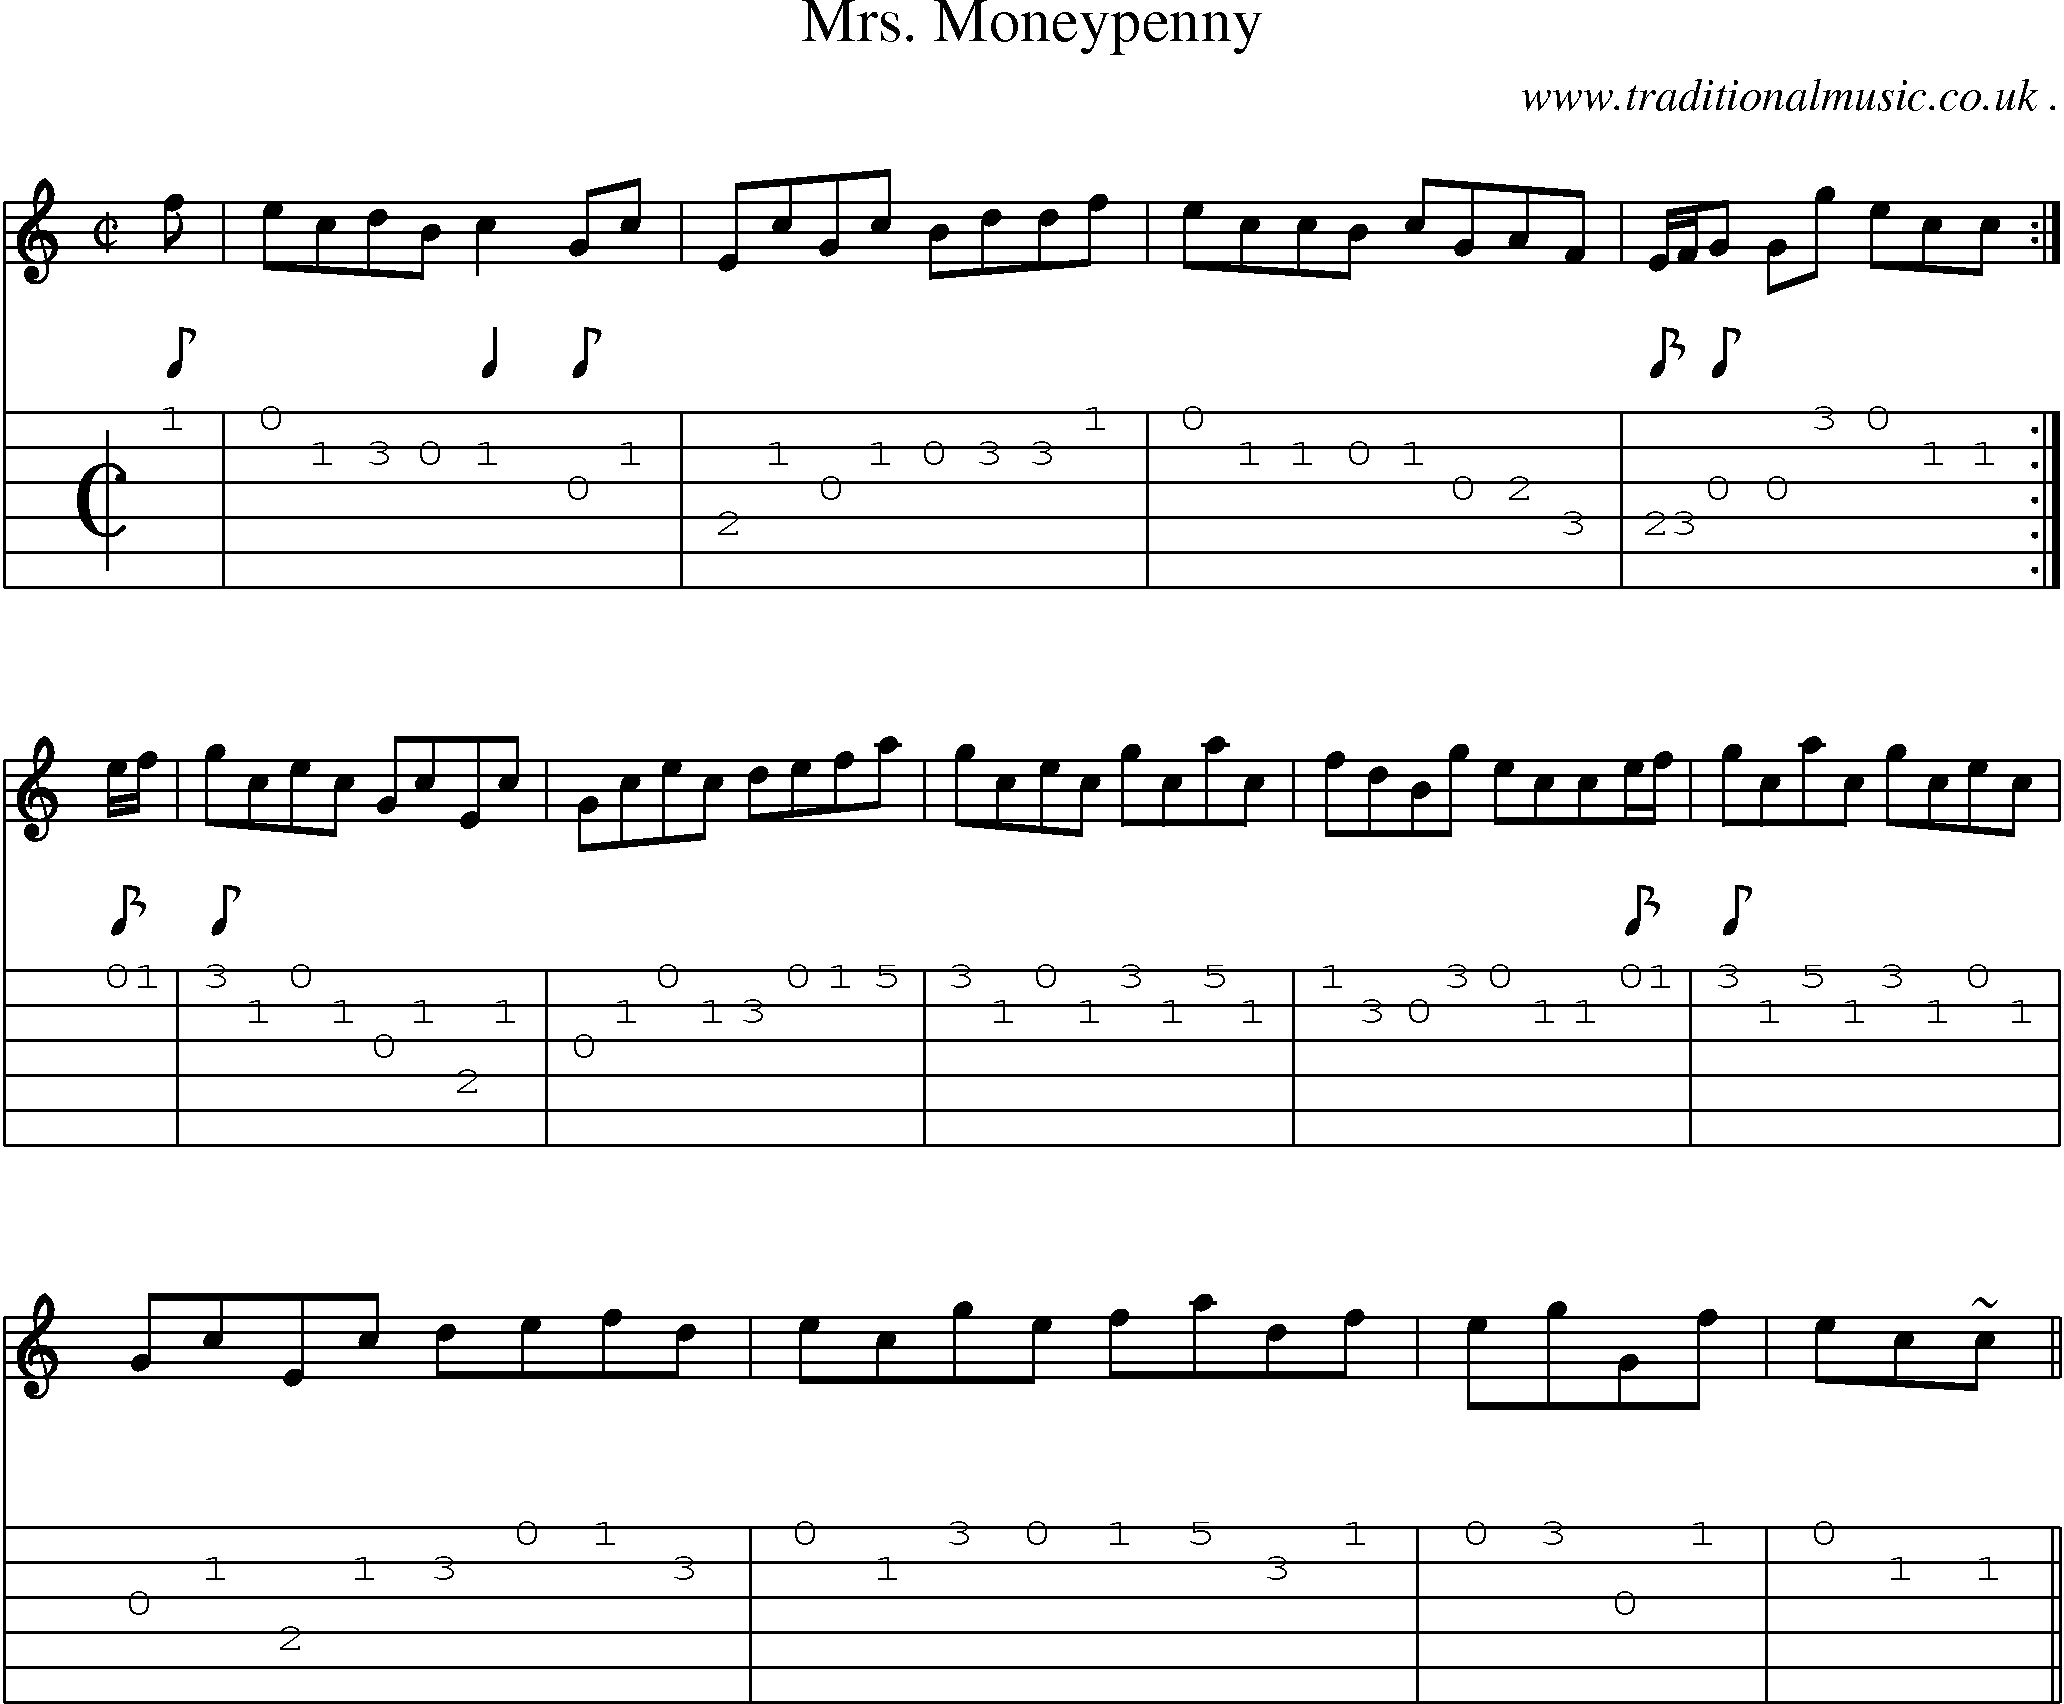 Sheet-music  score, Chords and Guitar Tabs for Mrs Moneypenny